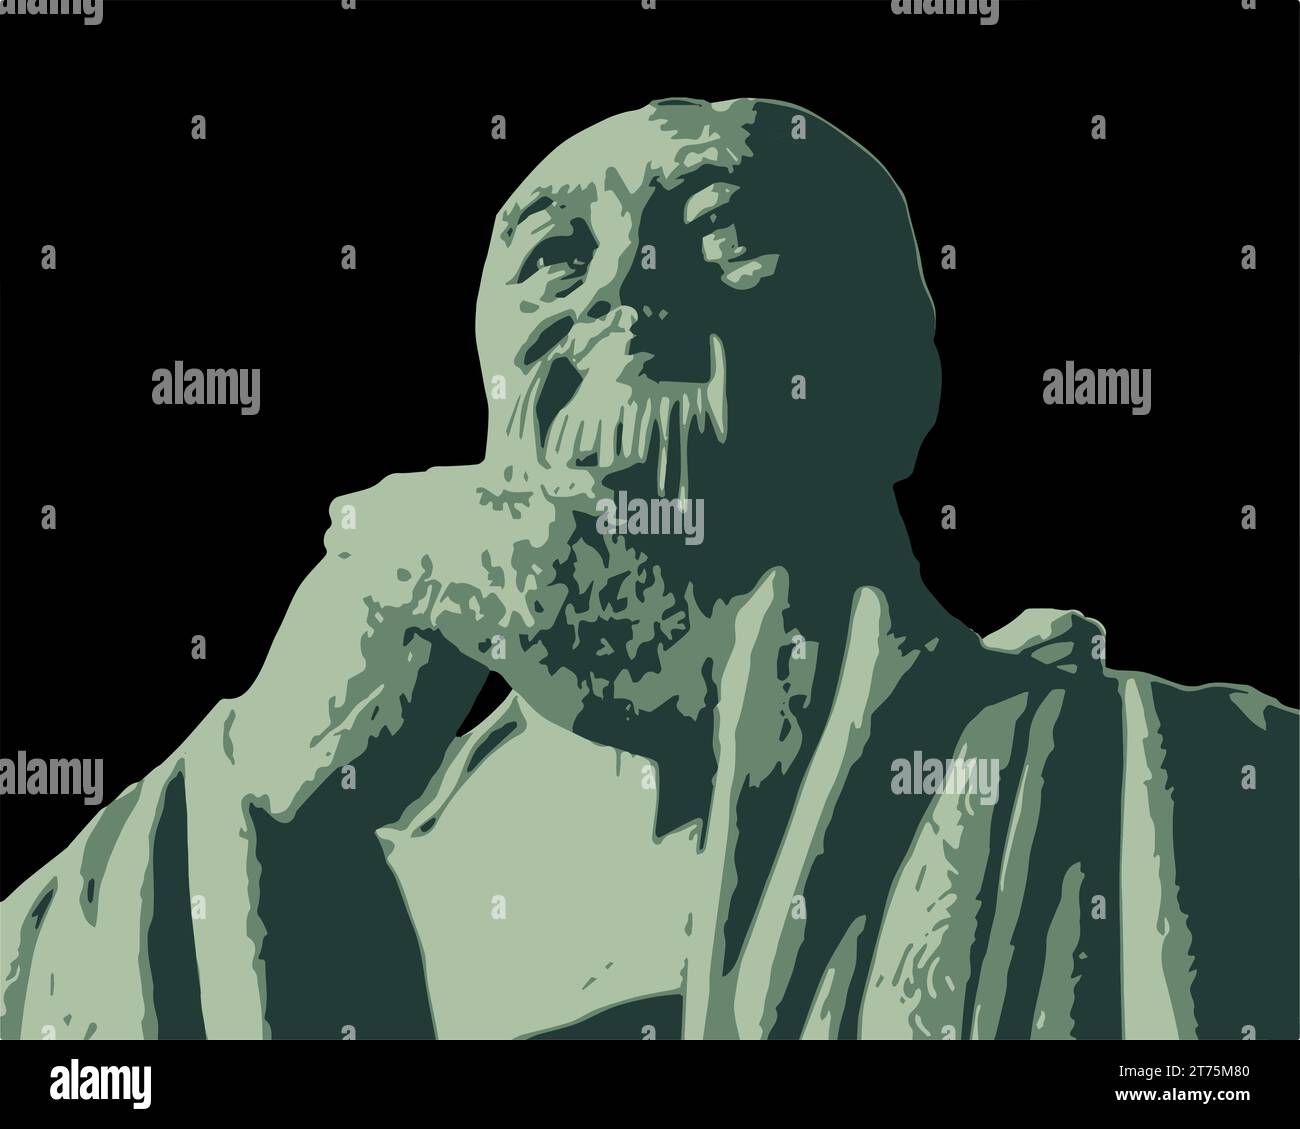 Confucius (551-479 BCE): Black background Vector of Influential Chinese philosopher and teacher, known for his ethical and moral teachings, Stock Vector